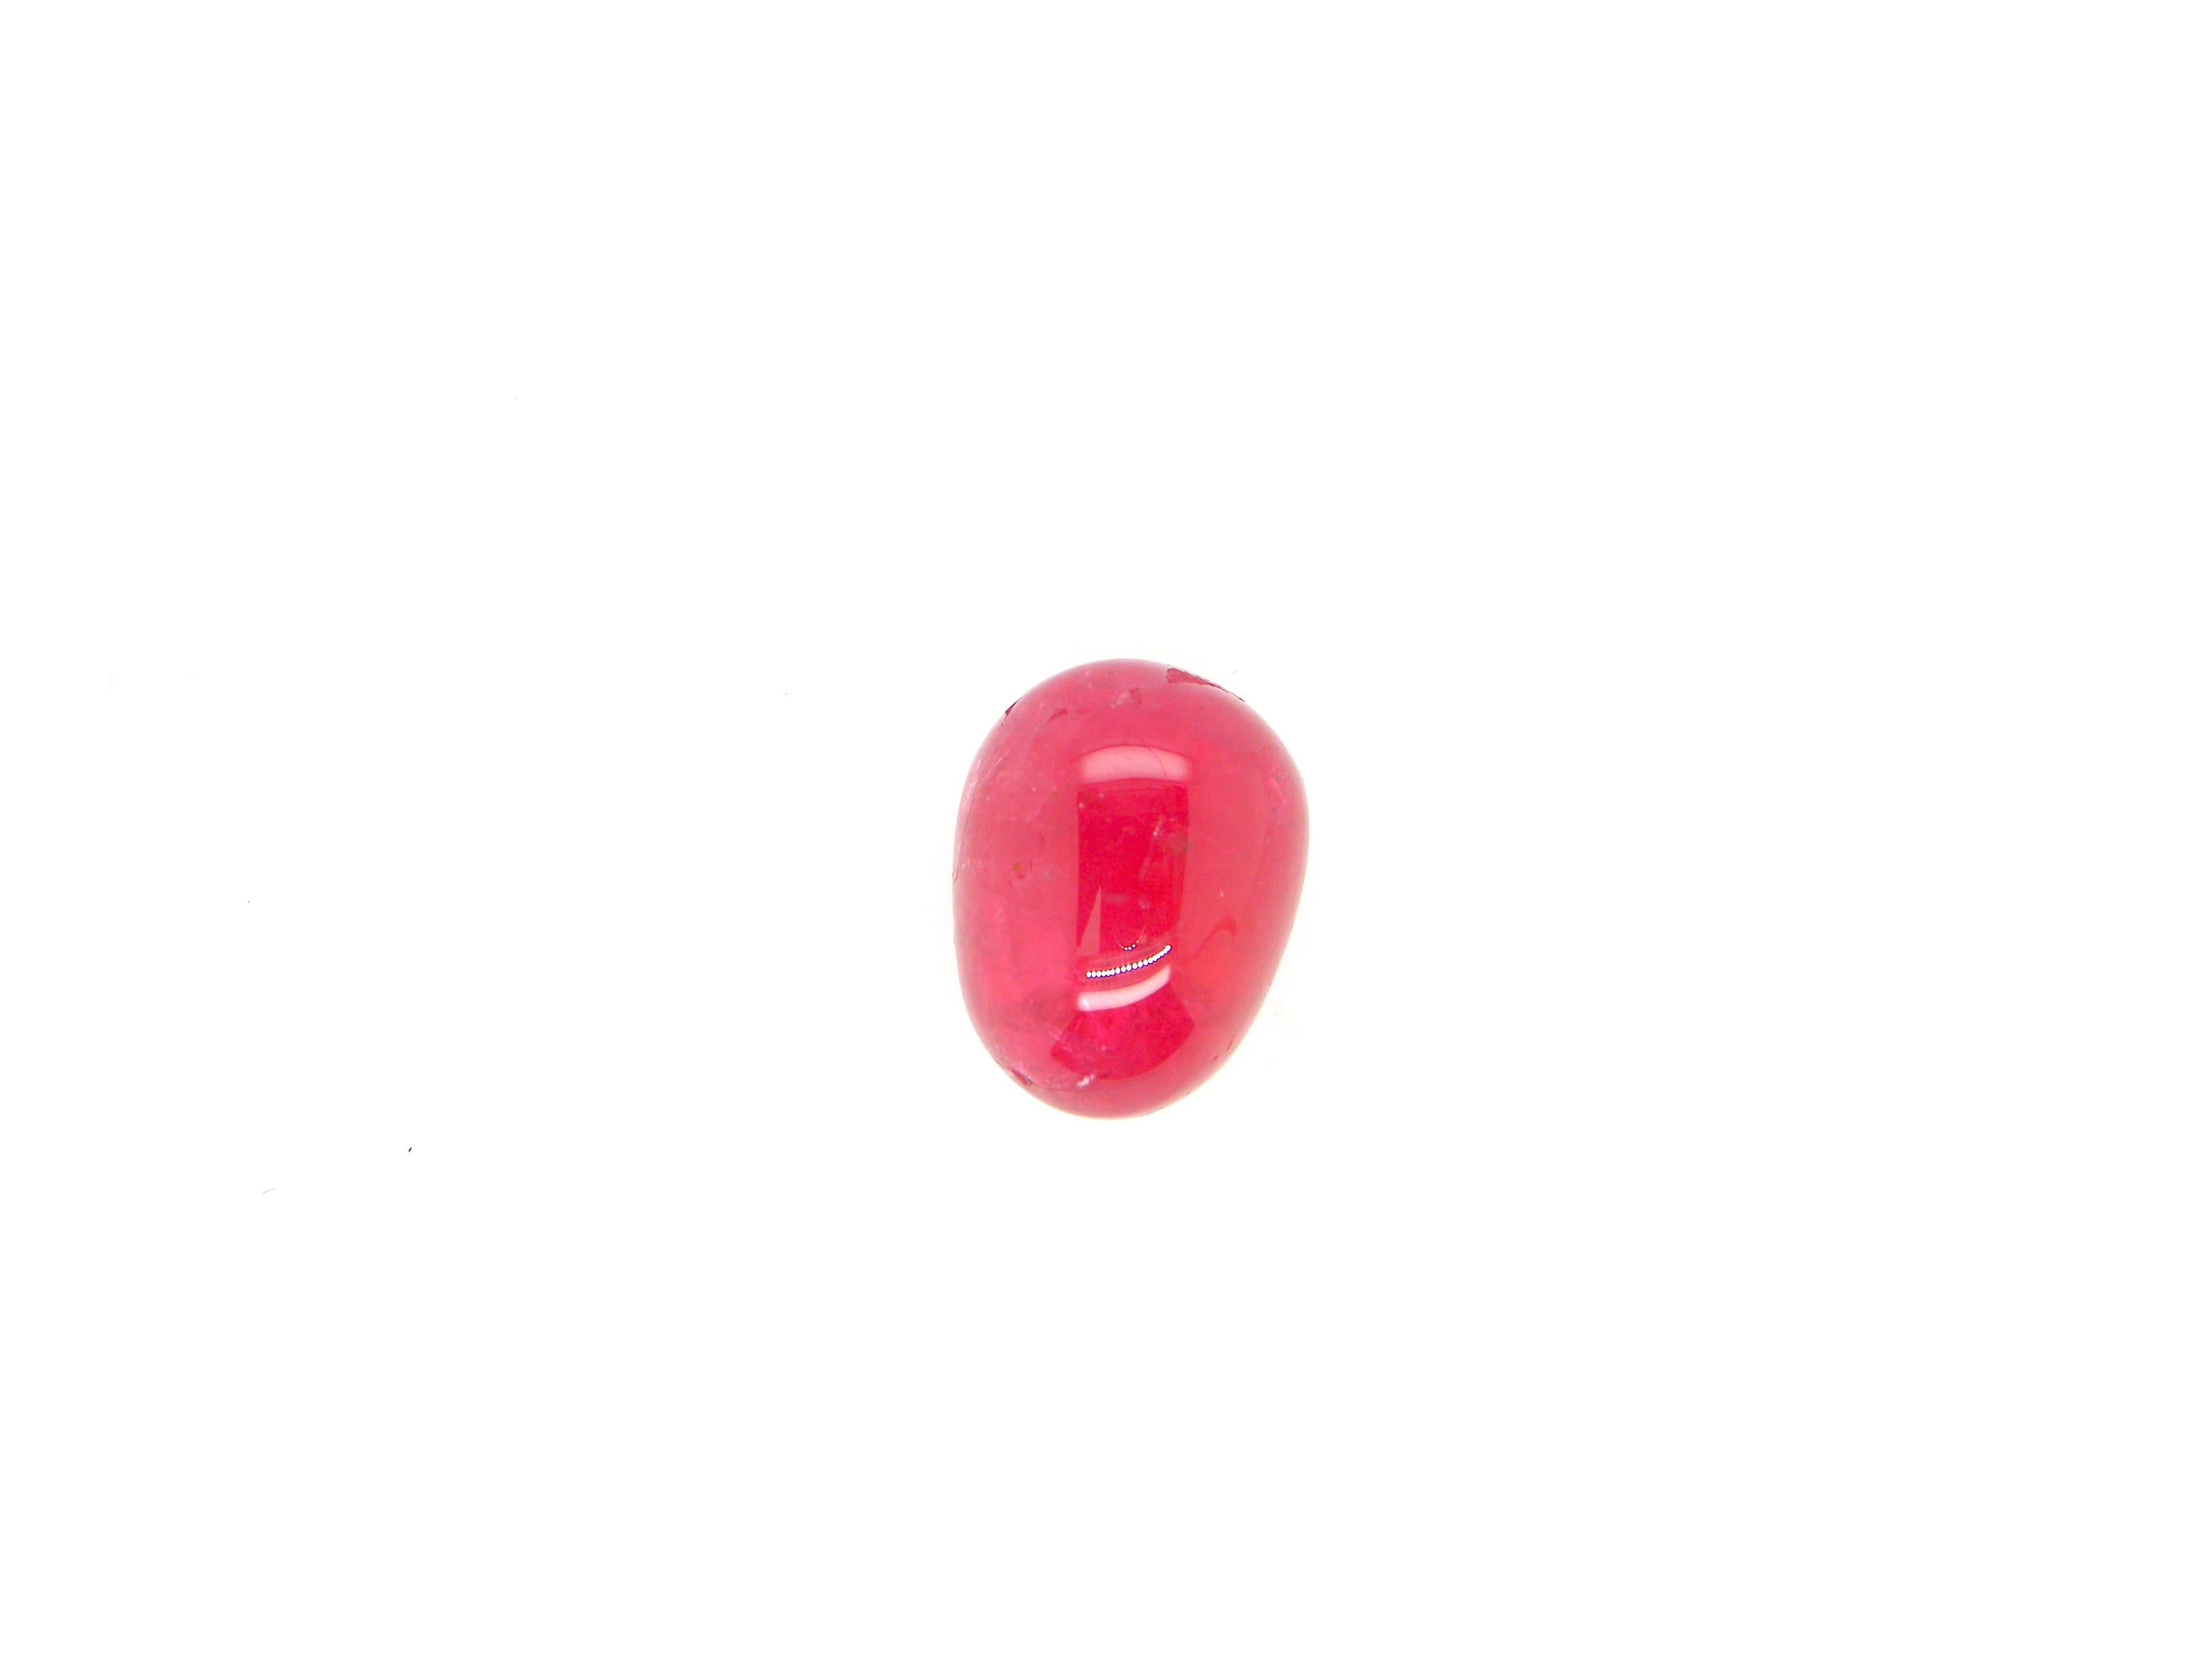 12 Carat Burma No Heat Red Spinel Cabochon:

A beautiful gem, it is a 12 carat unheated Burmese red spinel cabochon. Hailing from the historic Mogok mines in Burma, the spinel possesses an intense red colour saturation, with good lustre and